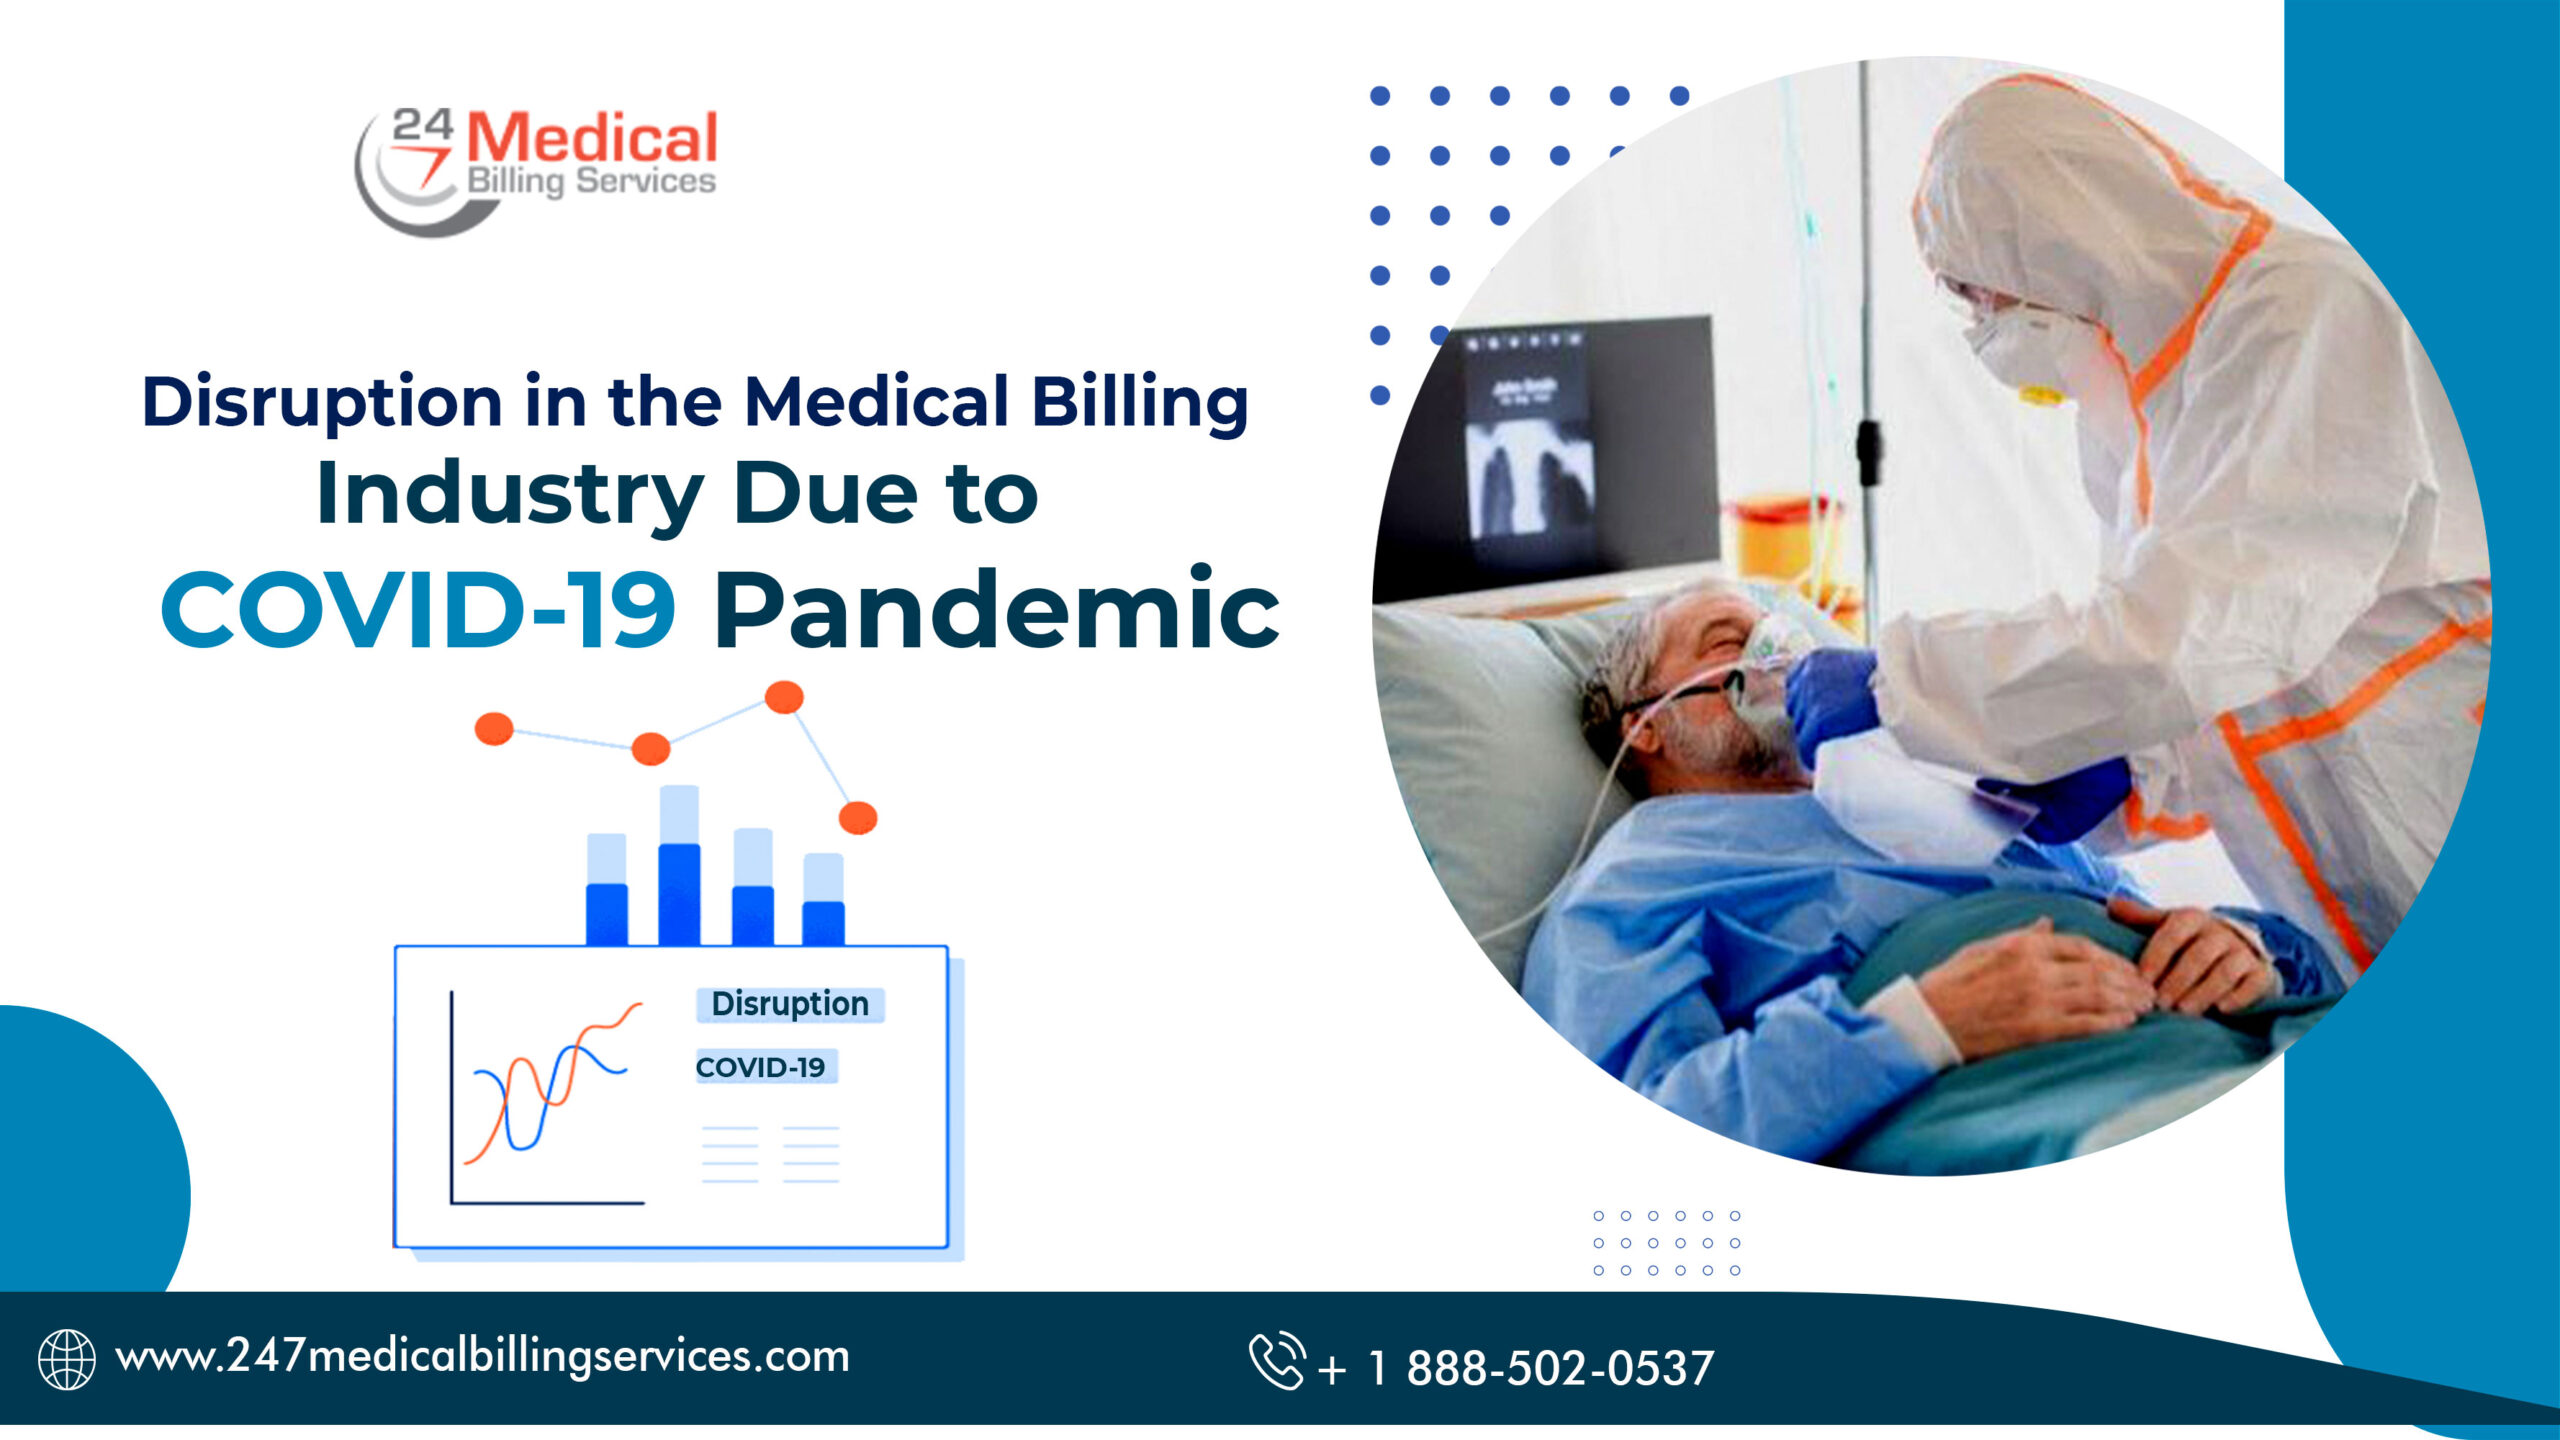  Disruption in the Medical Billing Industry Due to COVID-19 Pandemic